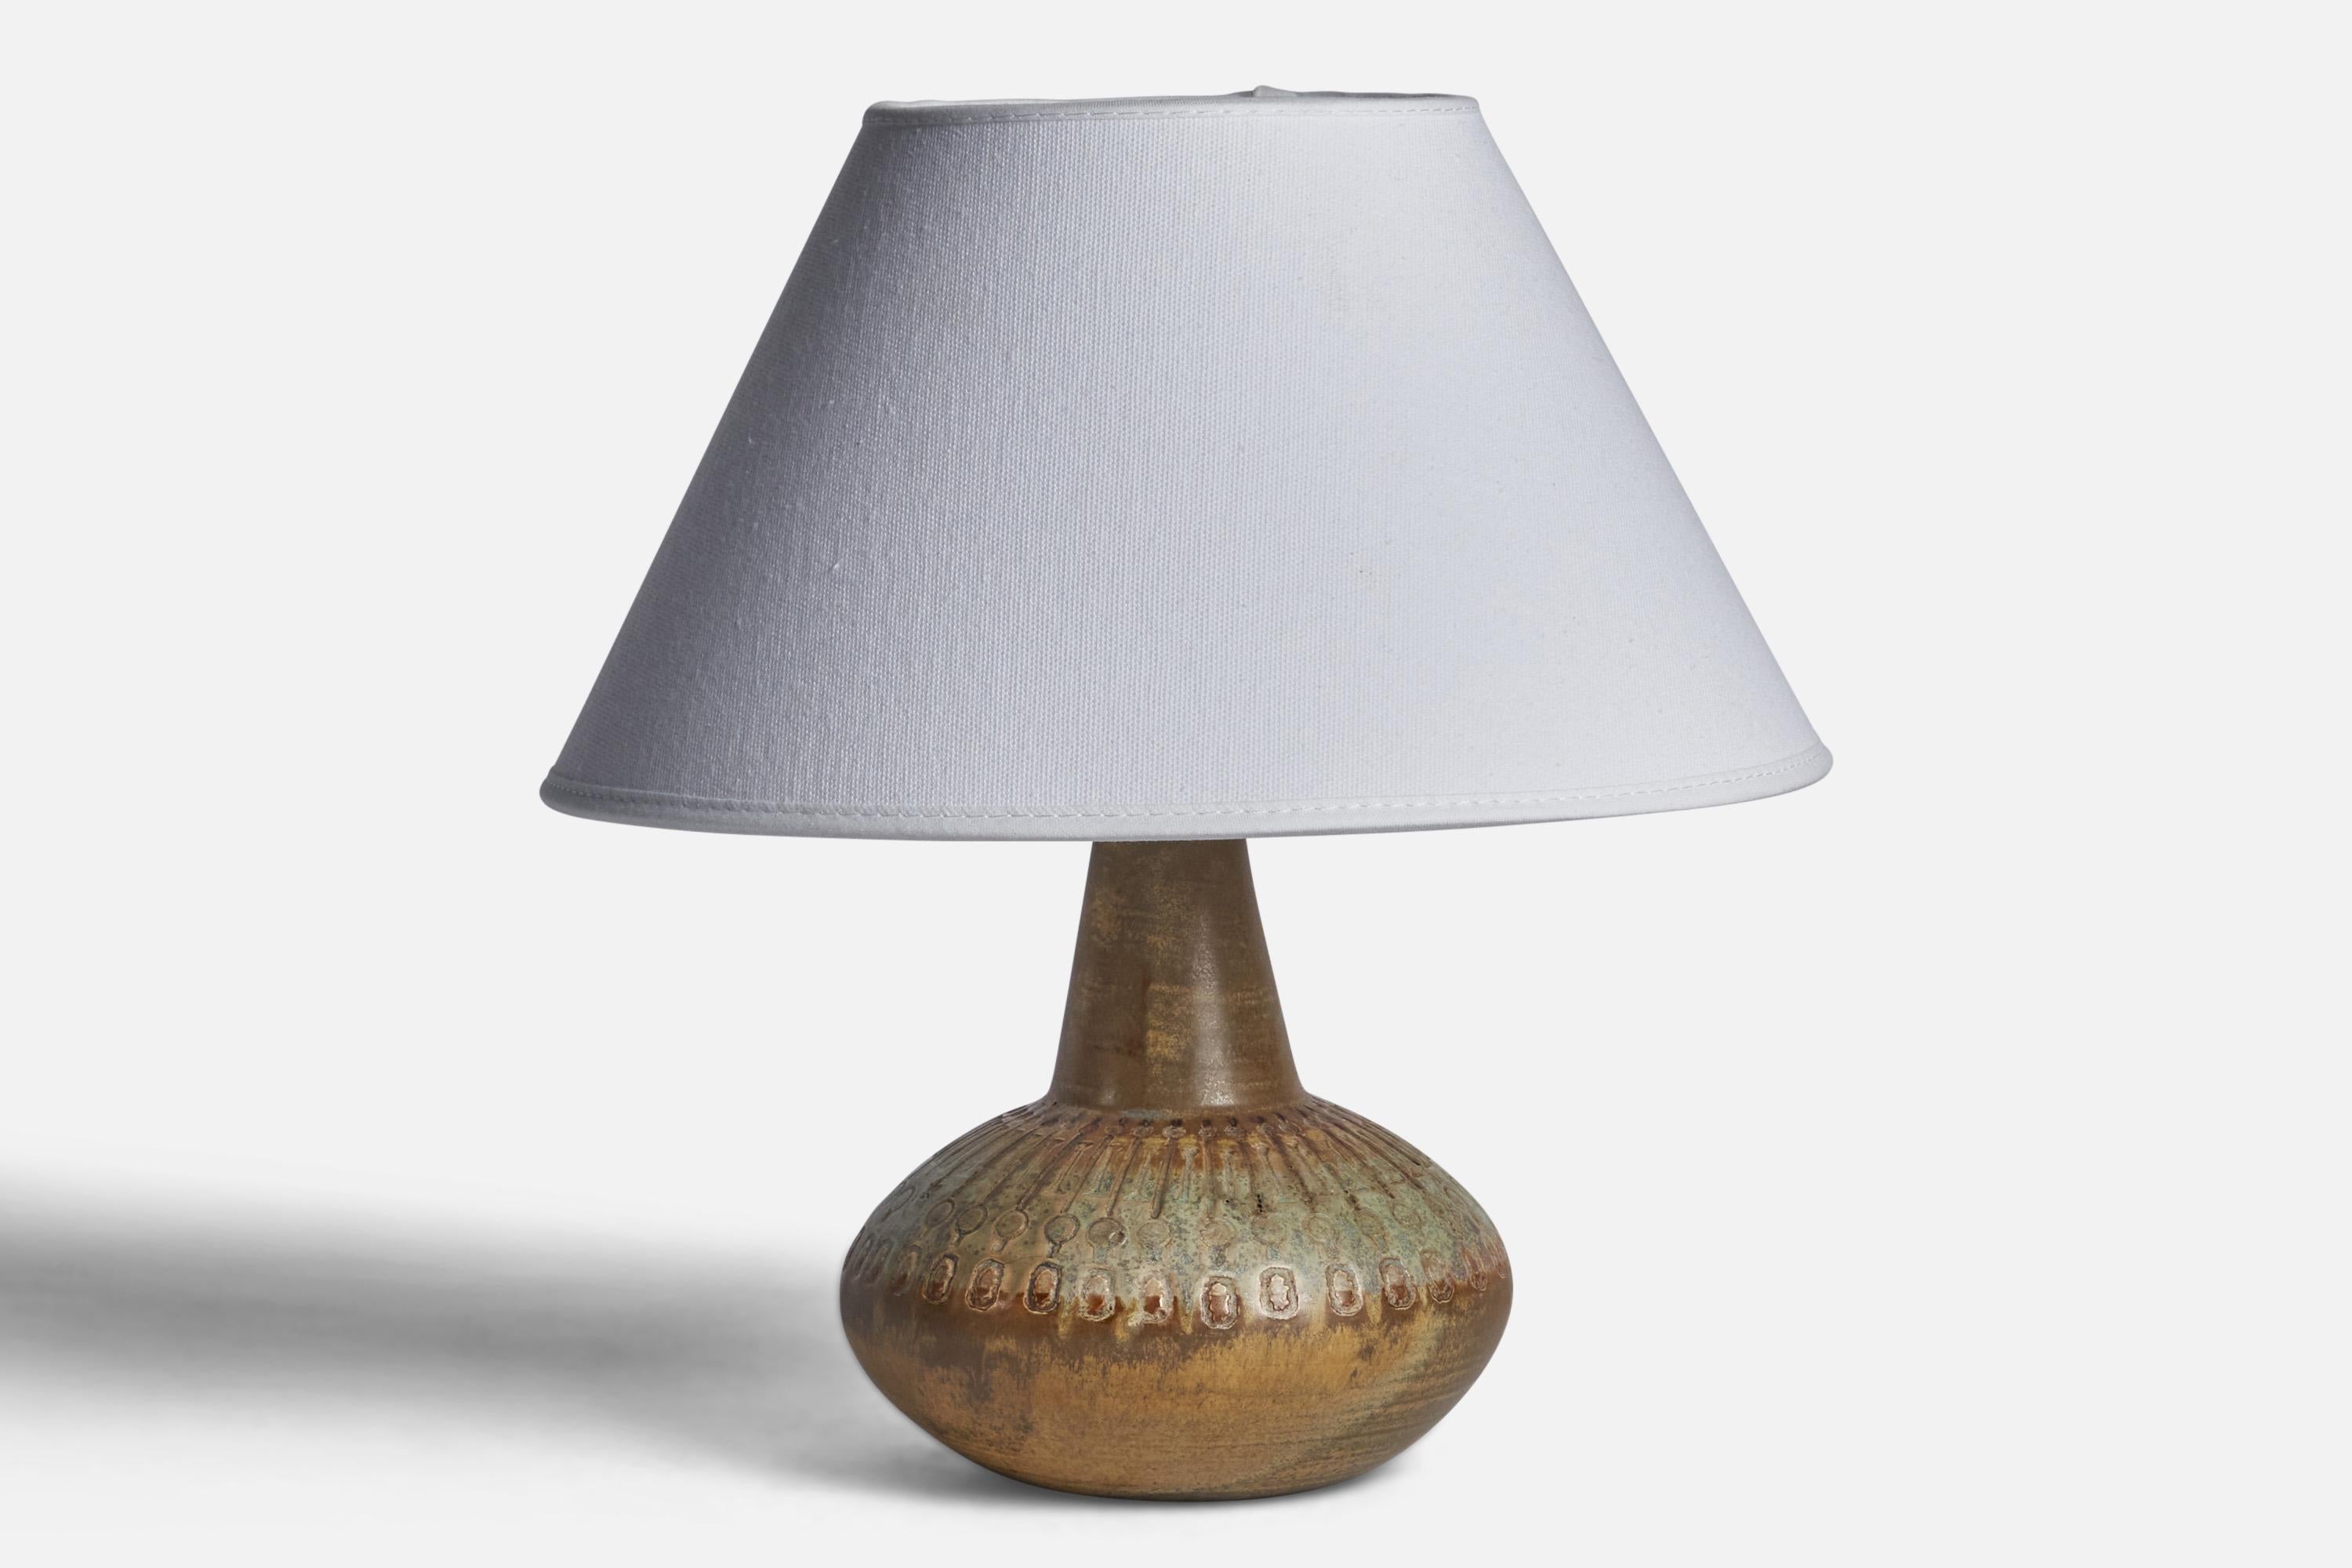 A green and brown-glazed stoneware table lamp, designed by Ulla Winbladh and produced by Alingsås Keramik, Sweden, 1960s.

Dimensions of Lamp (inches): 7.5” H x 5.5” Diameter
Dimensions of Shade (inches): 7” Top Diameter x 10” Bottom Diameter x